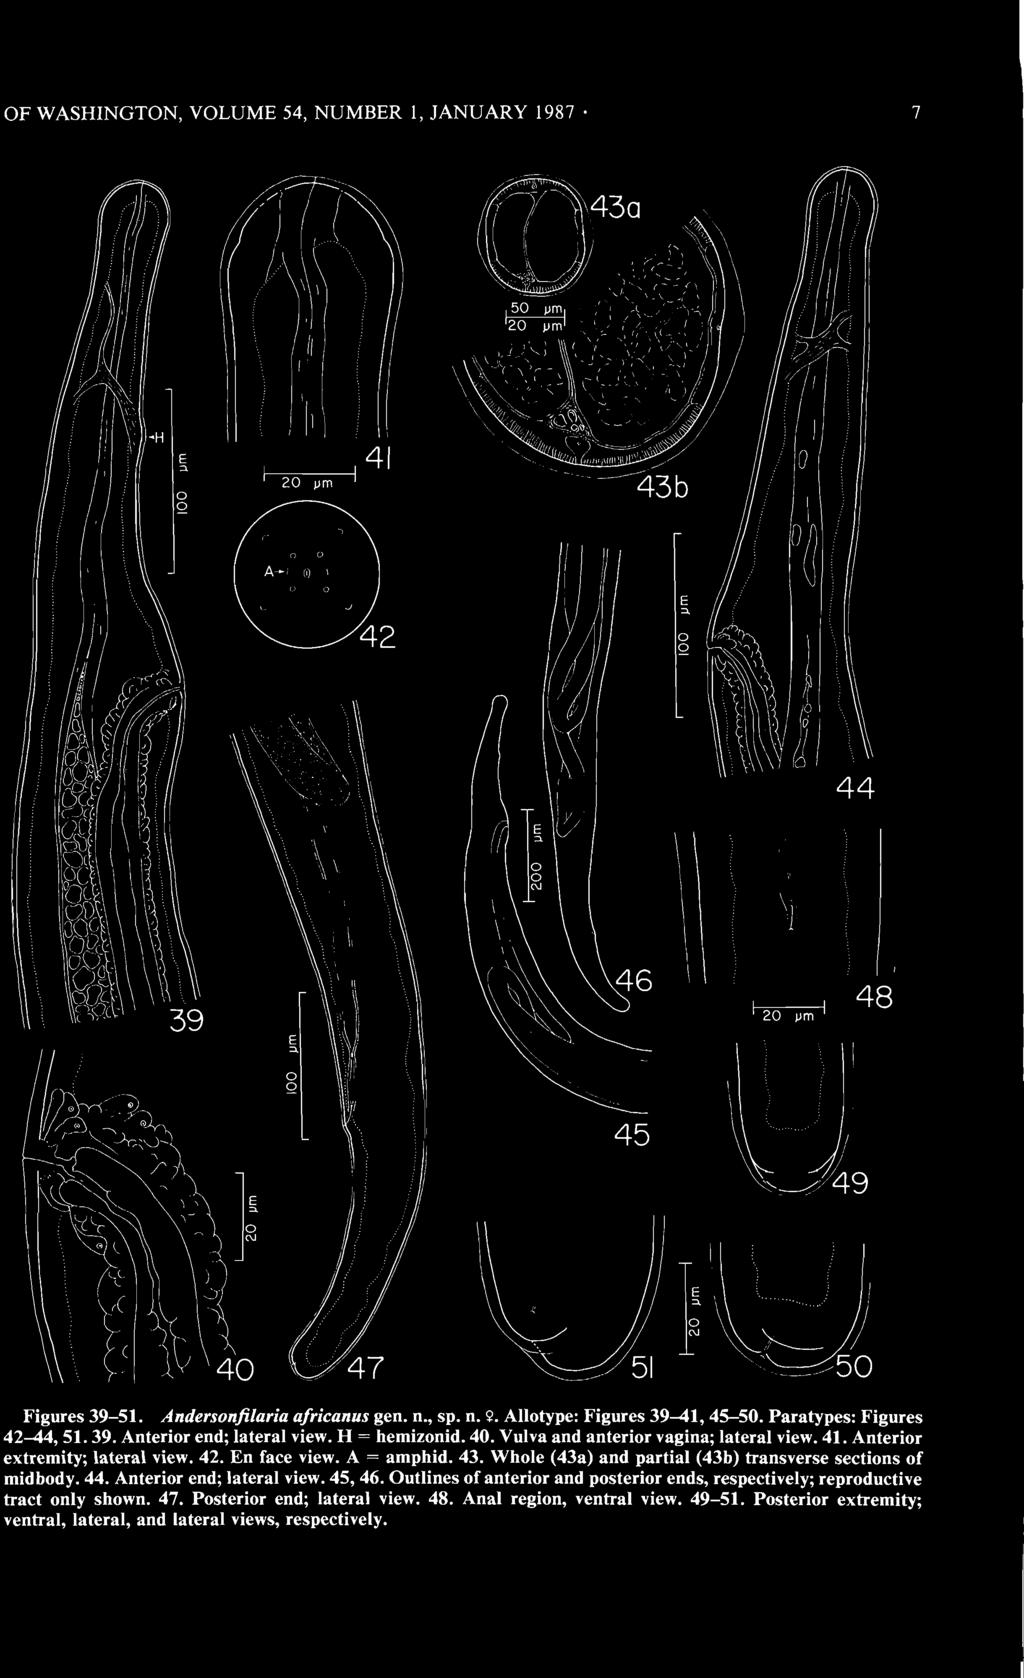 Outlines of anterior and posterior ends, respectively; reproductive tract only shown. 47.